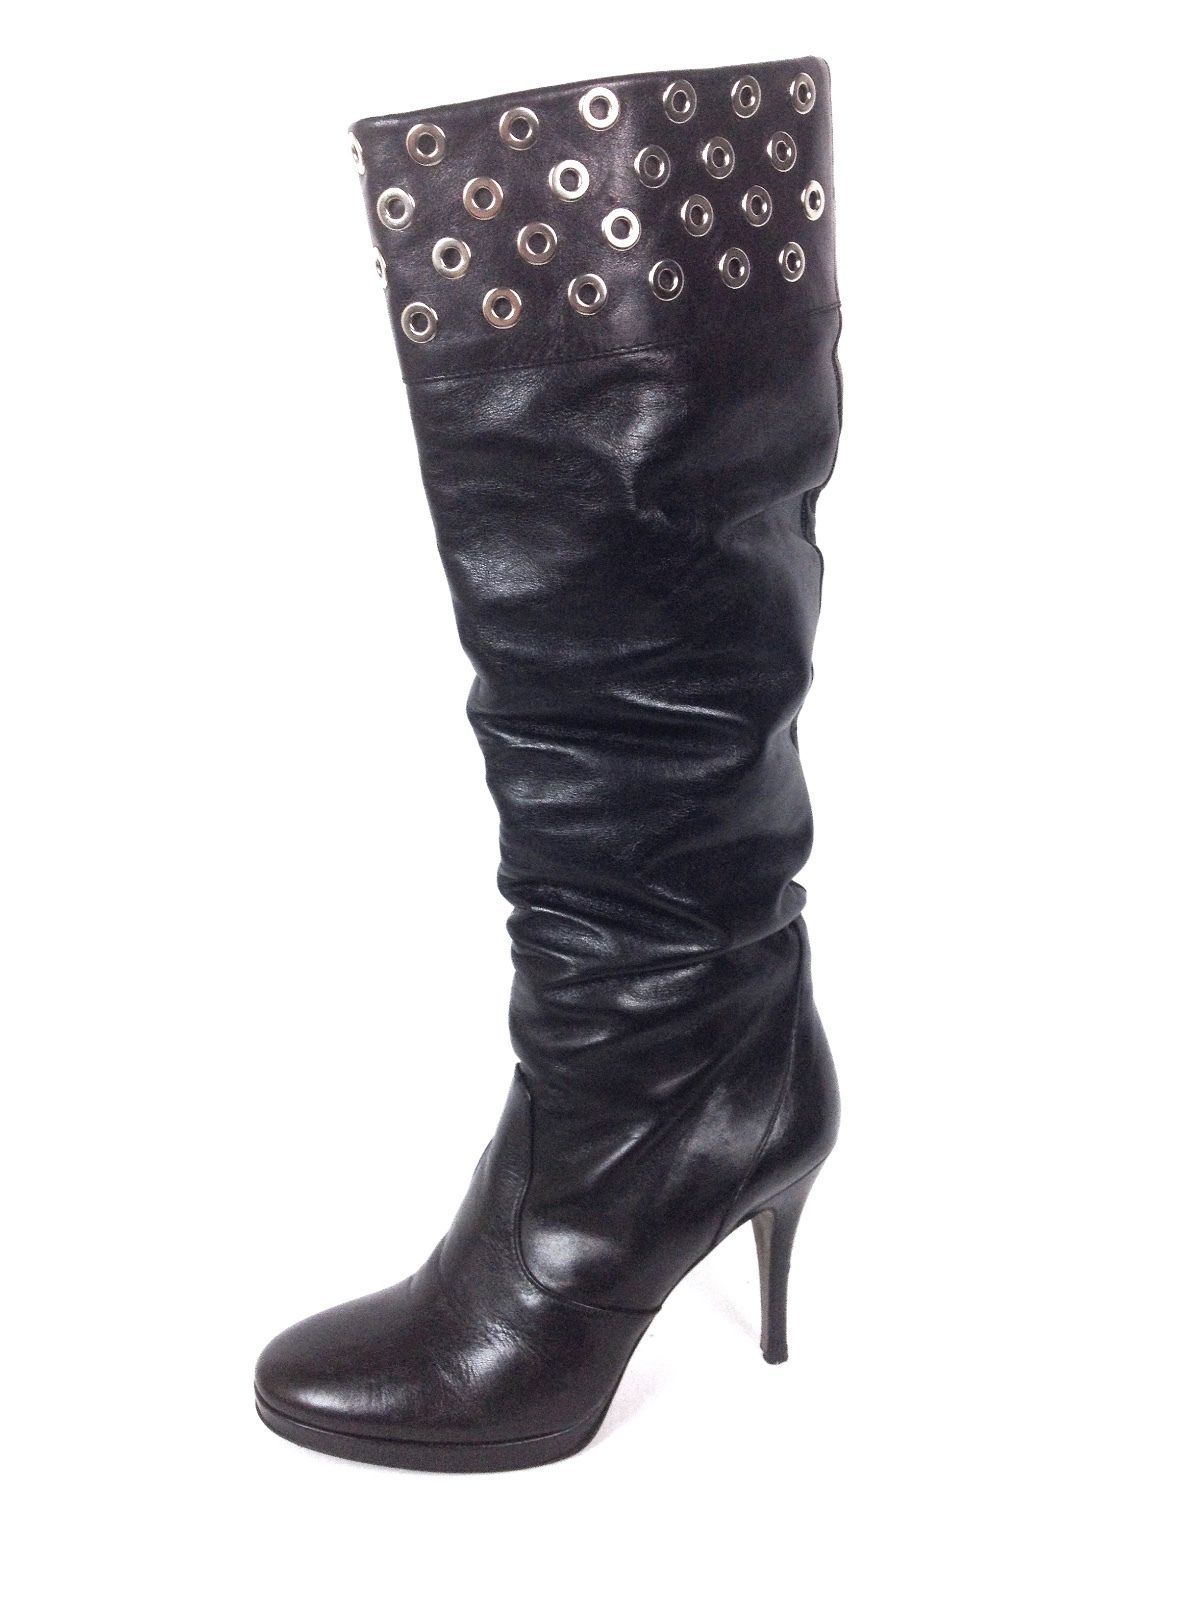 Via Spiga Shoes 7.5 Womens Black Leather Boots For Sale - Item #1474248